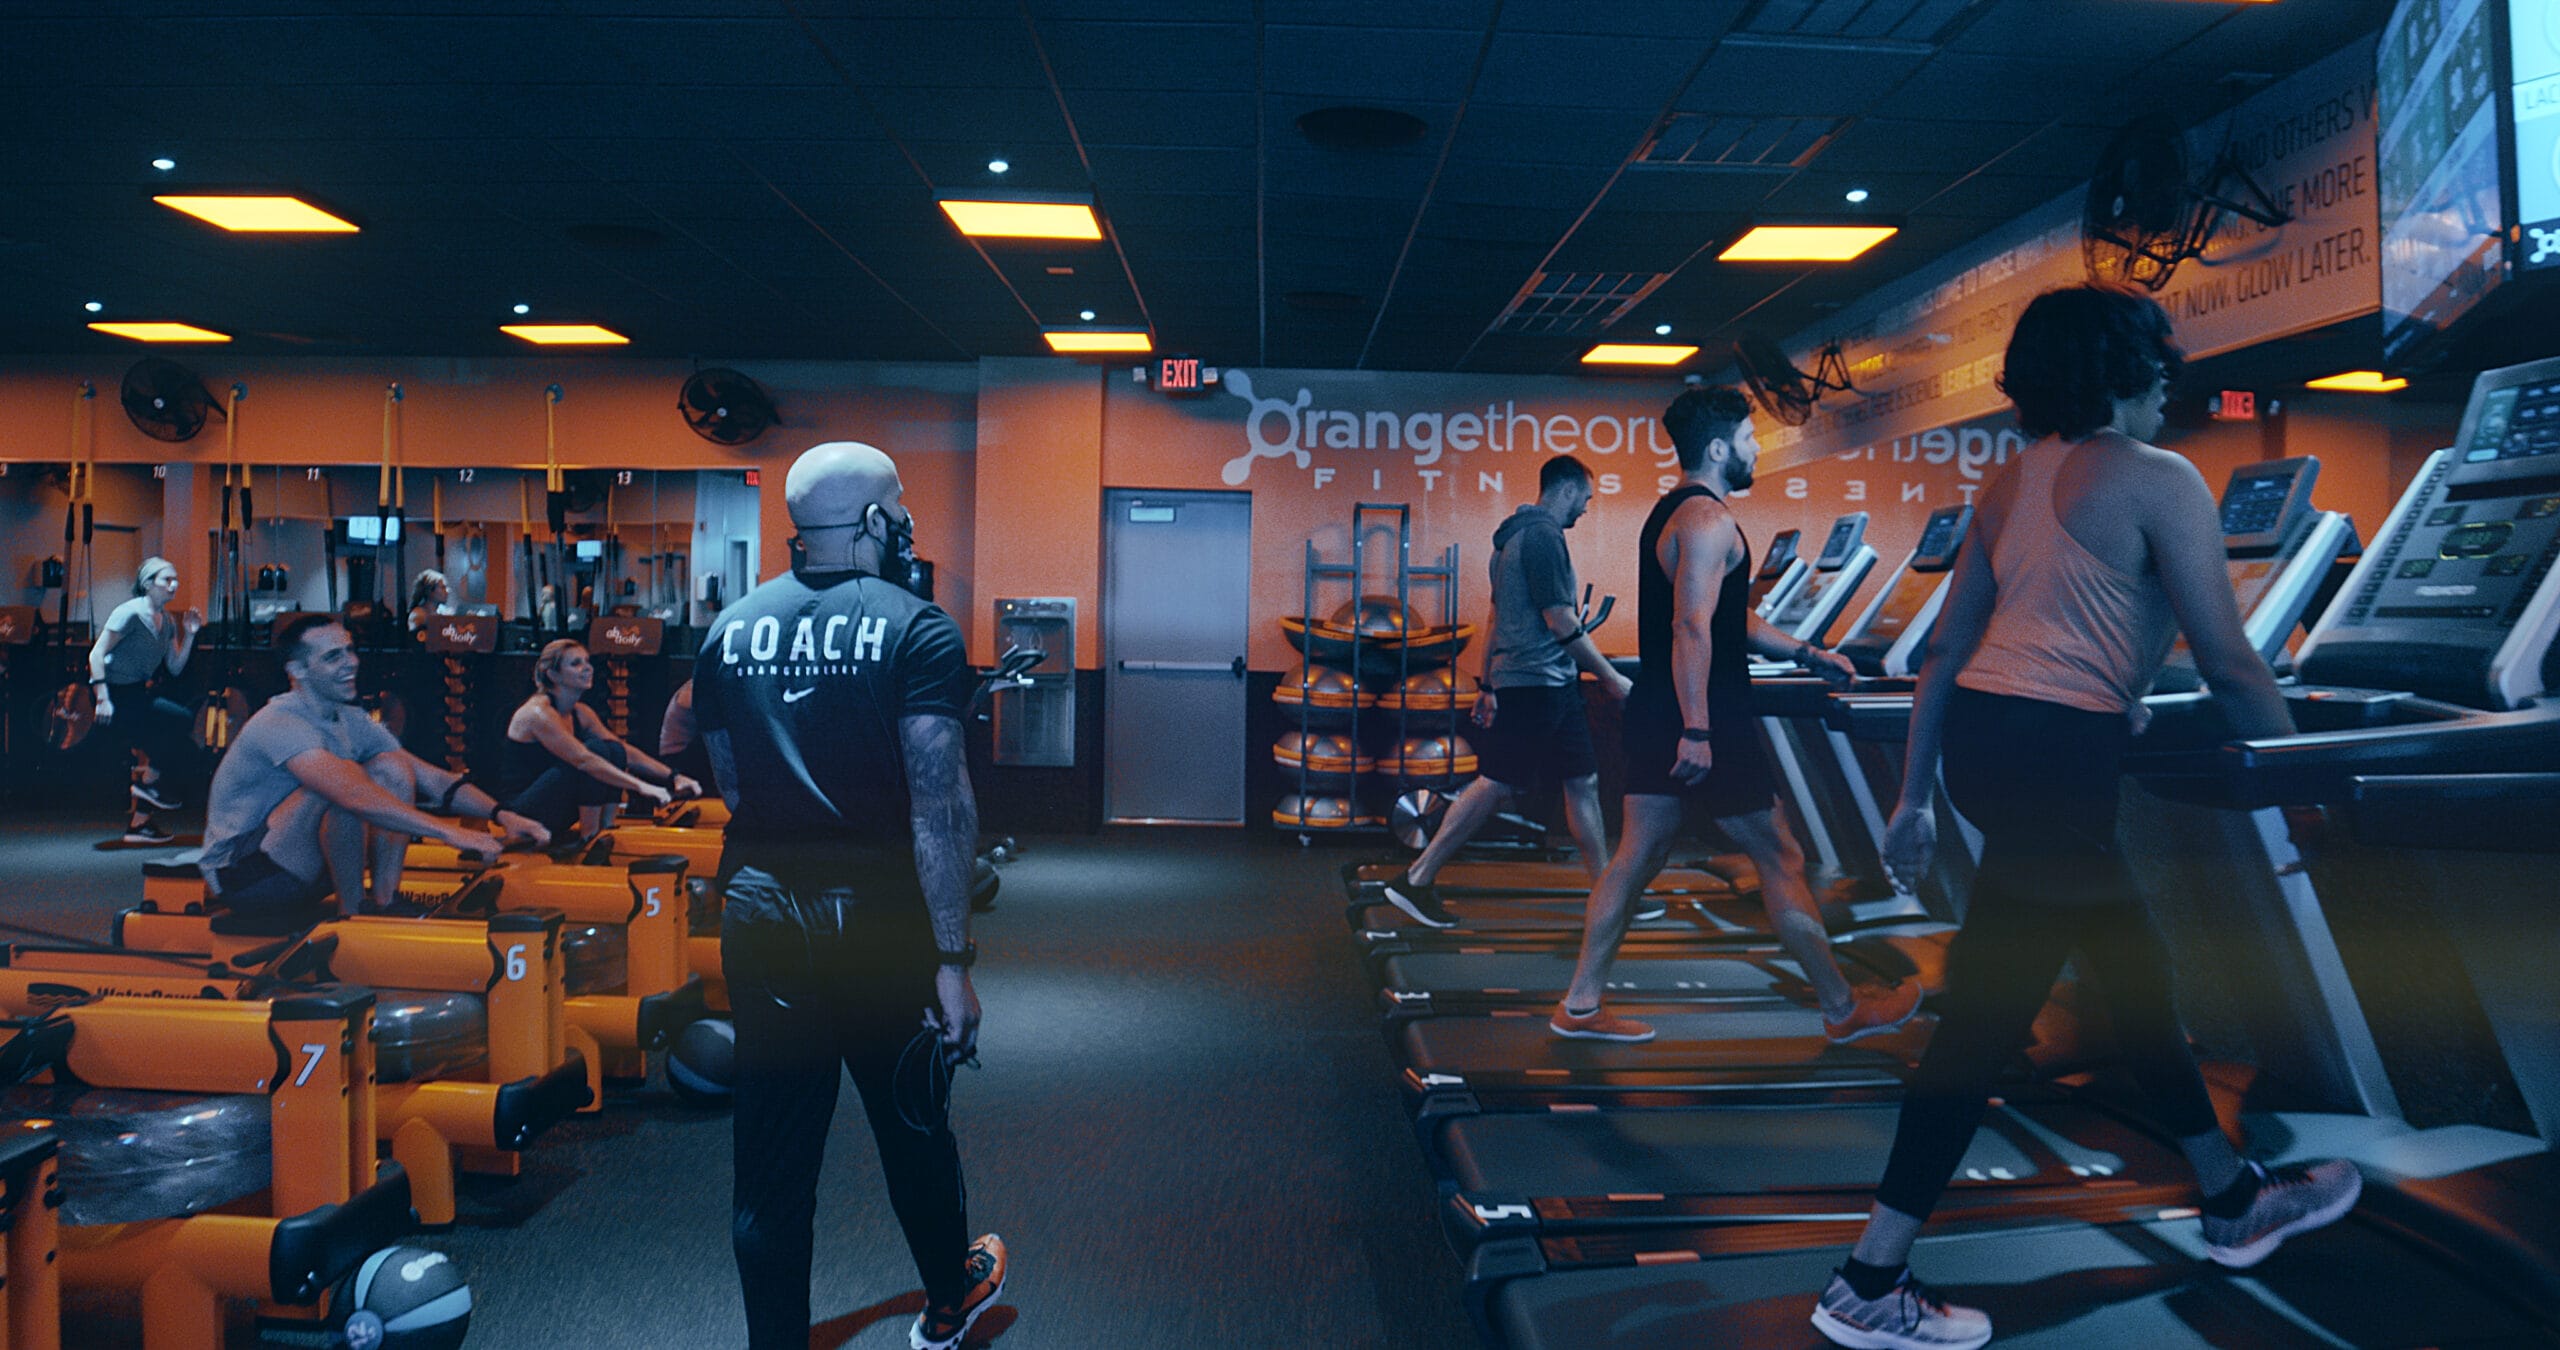 Orangetheory Gives Back to North Texas Communities - Focus Daily News